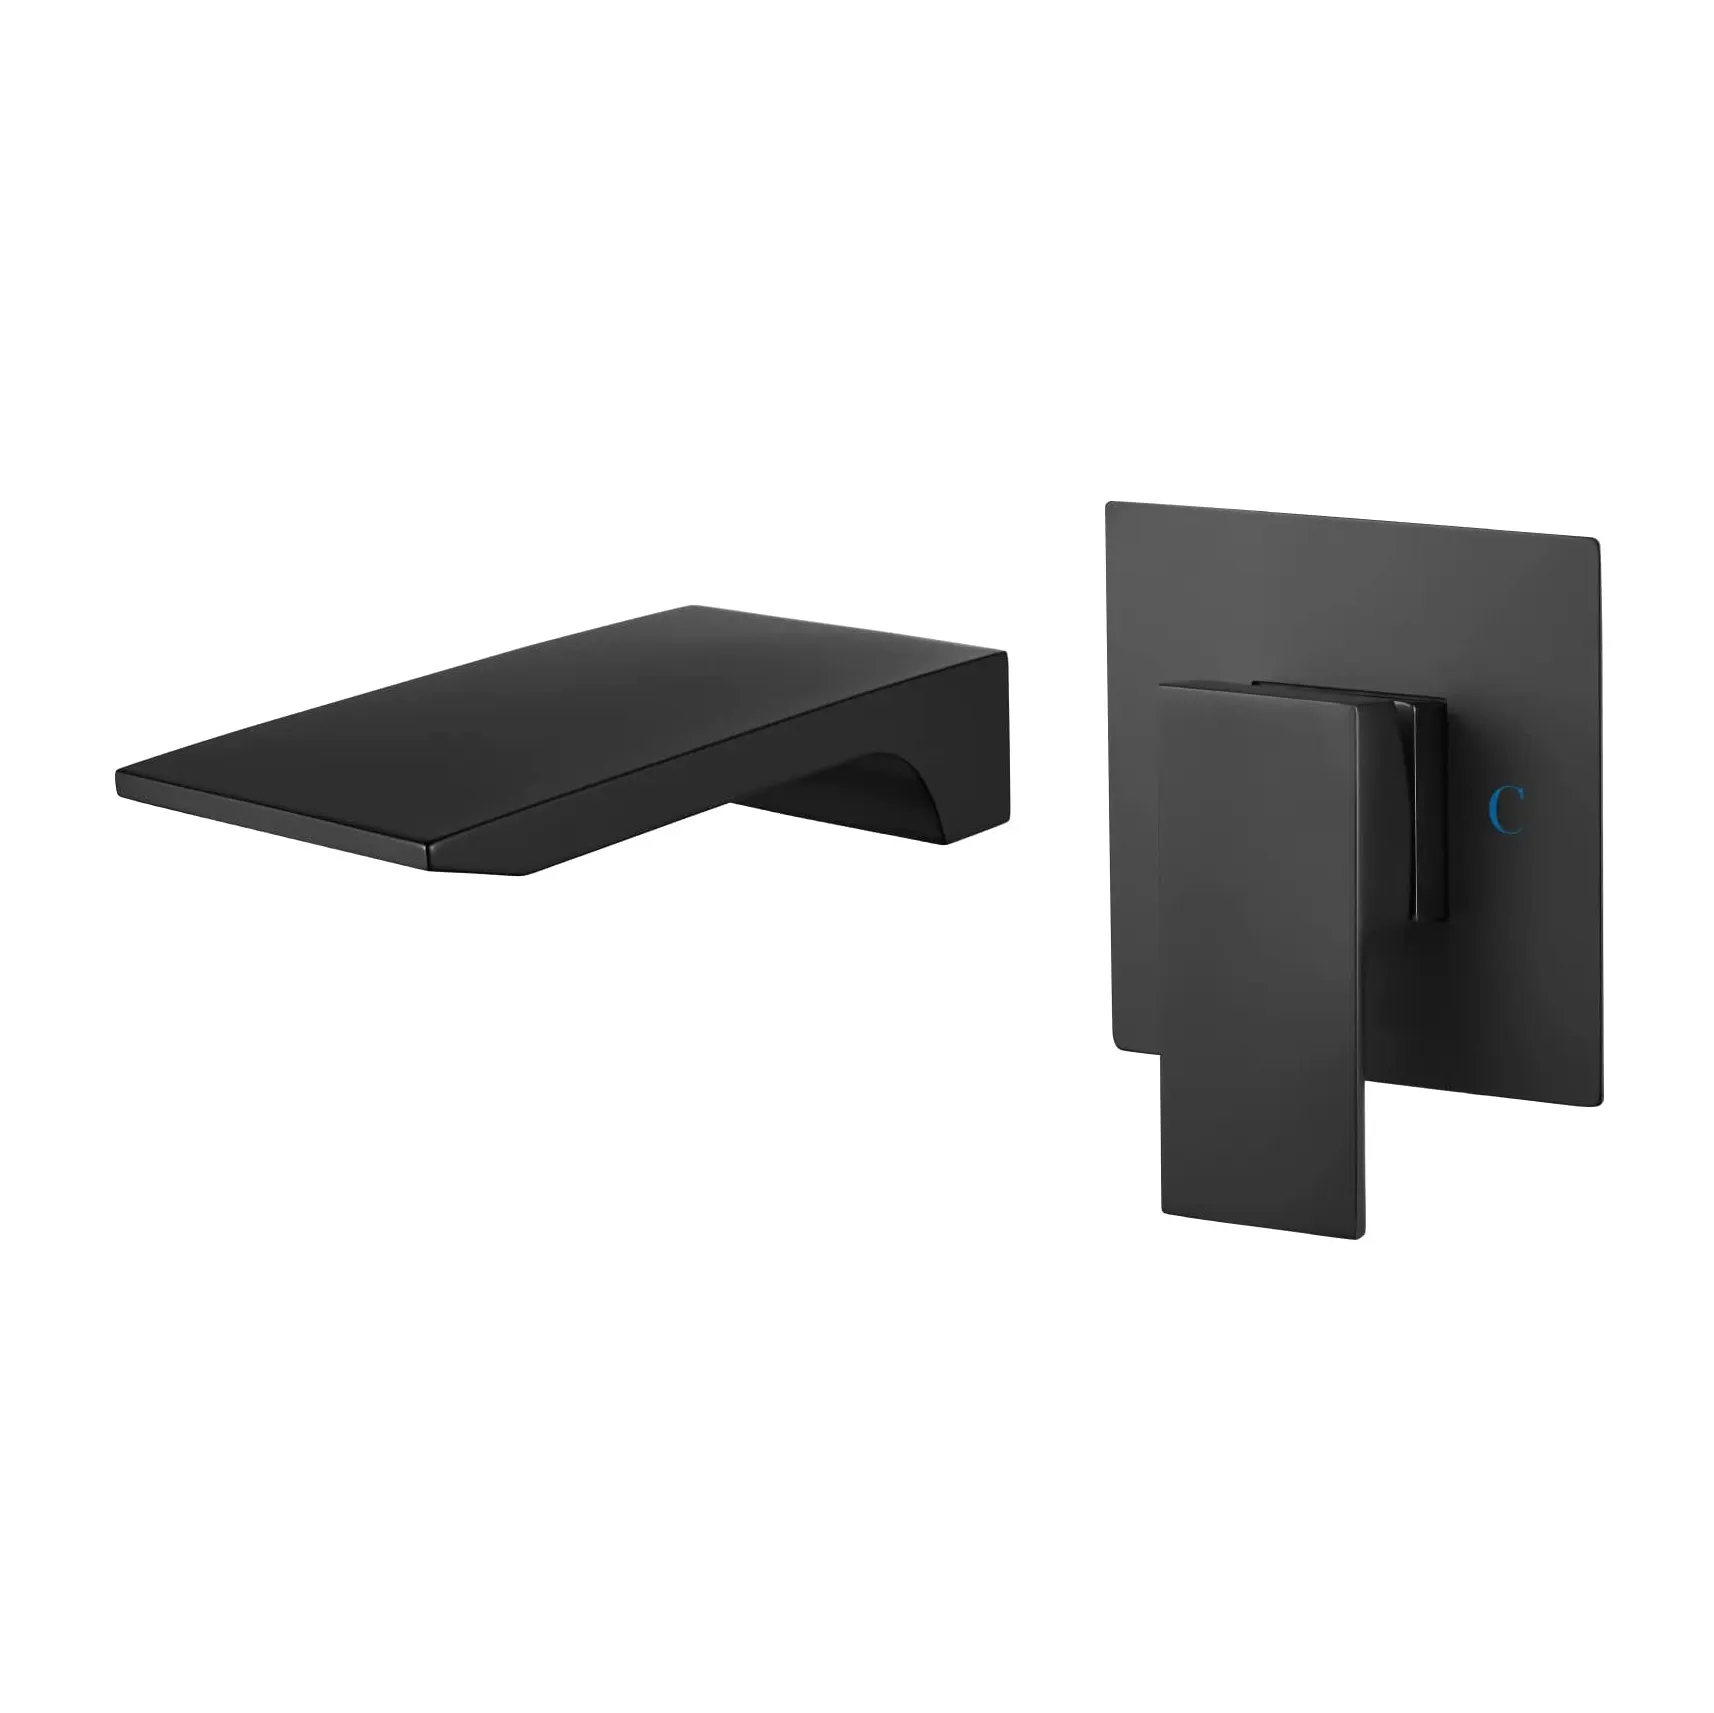 Black Wall Mounted Bathroom Taps Concealed Hot and Cold Water Mixer Brass Waterfall Basin Faucet